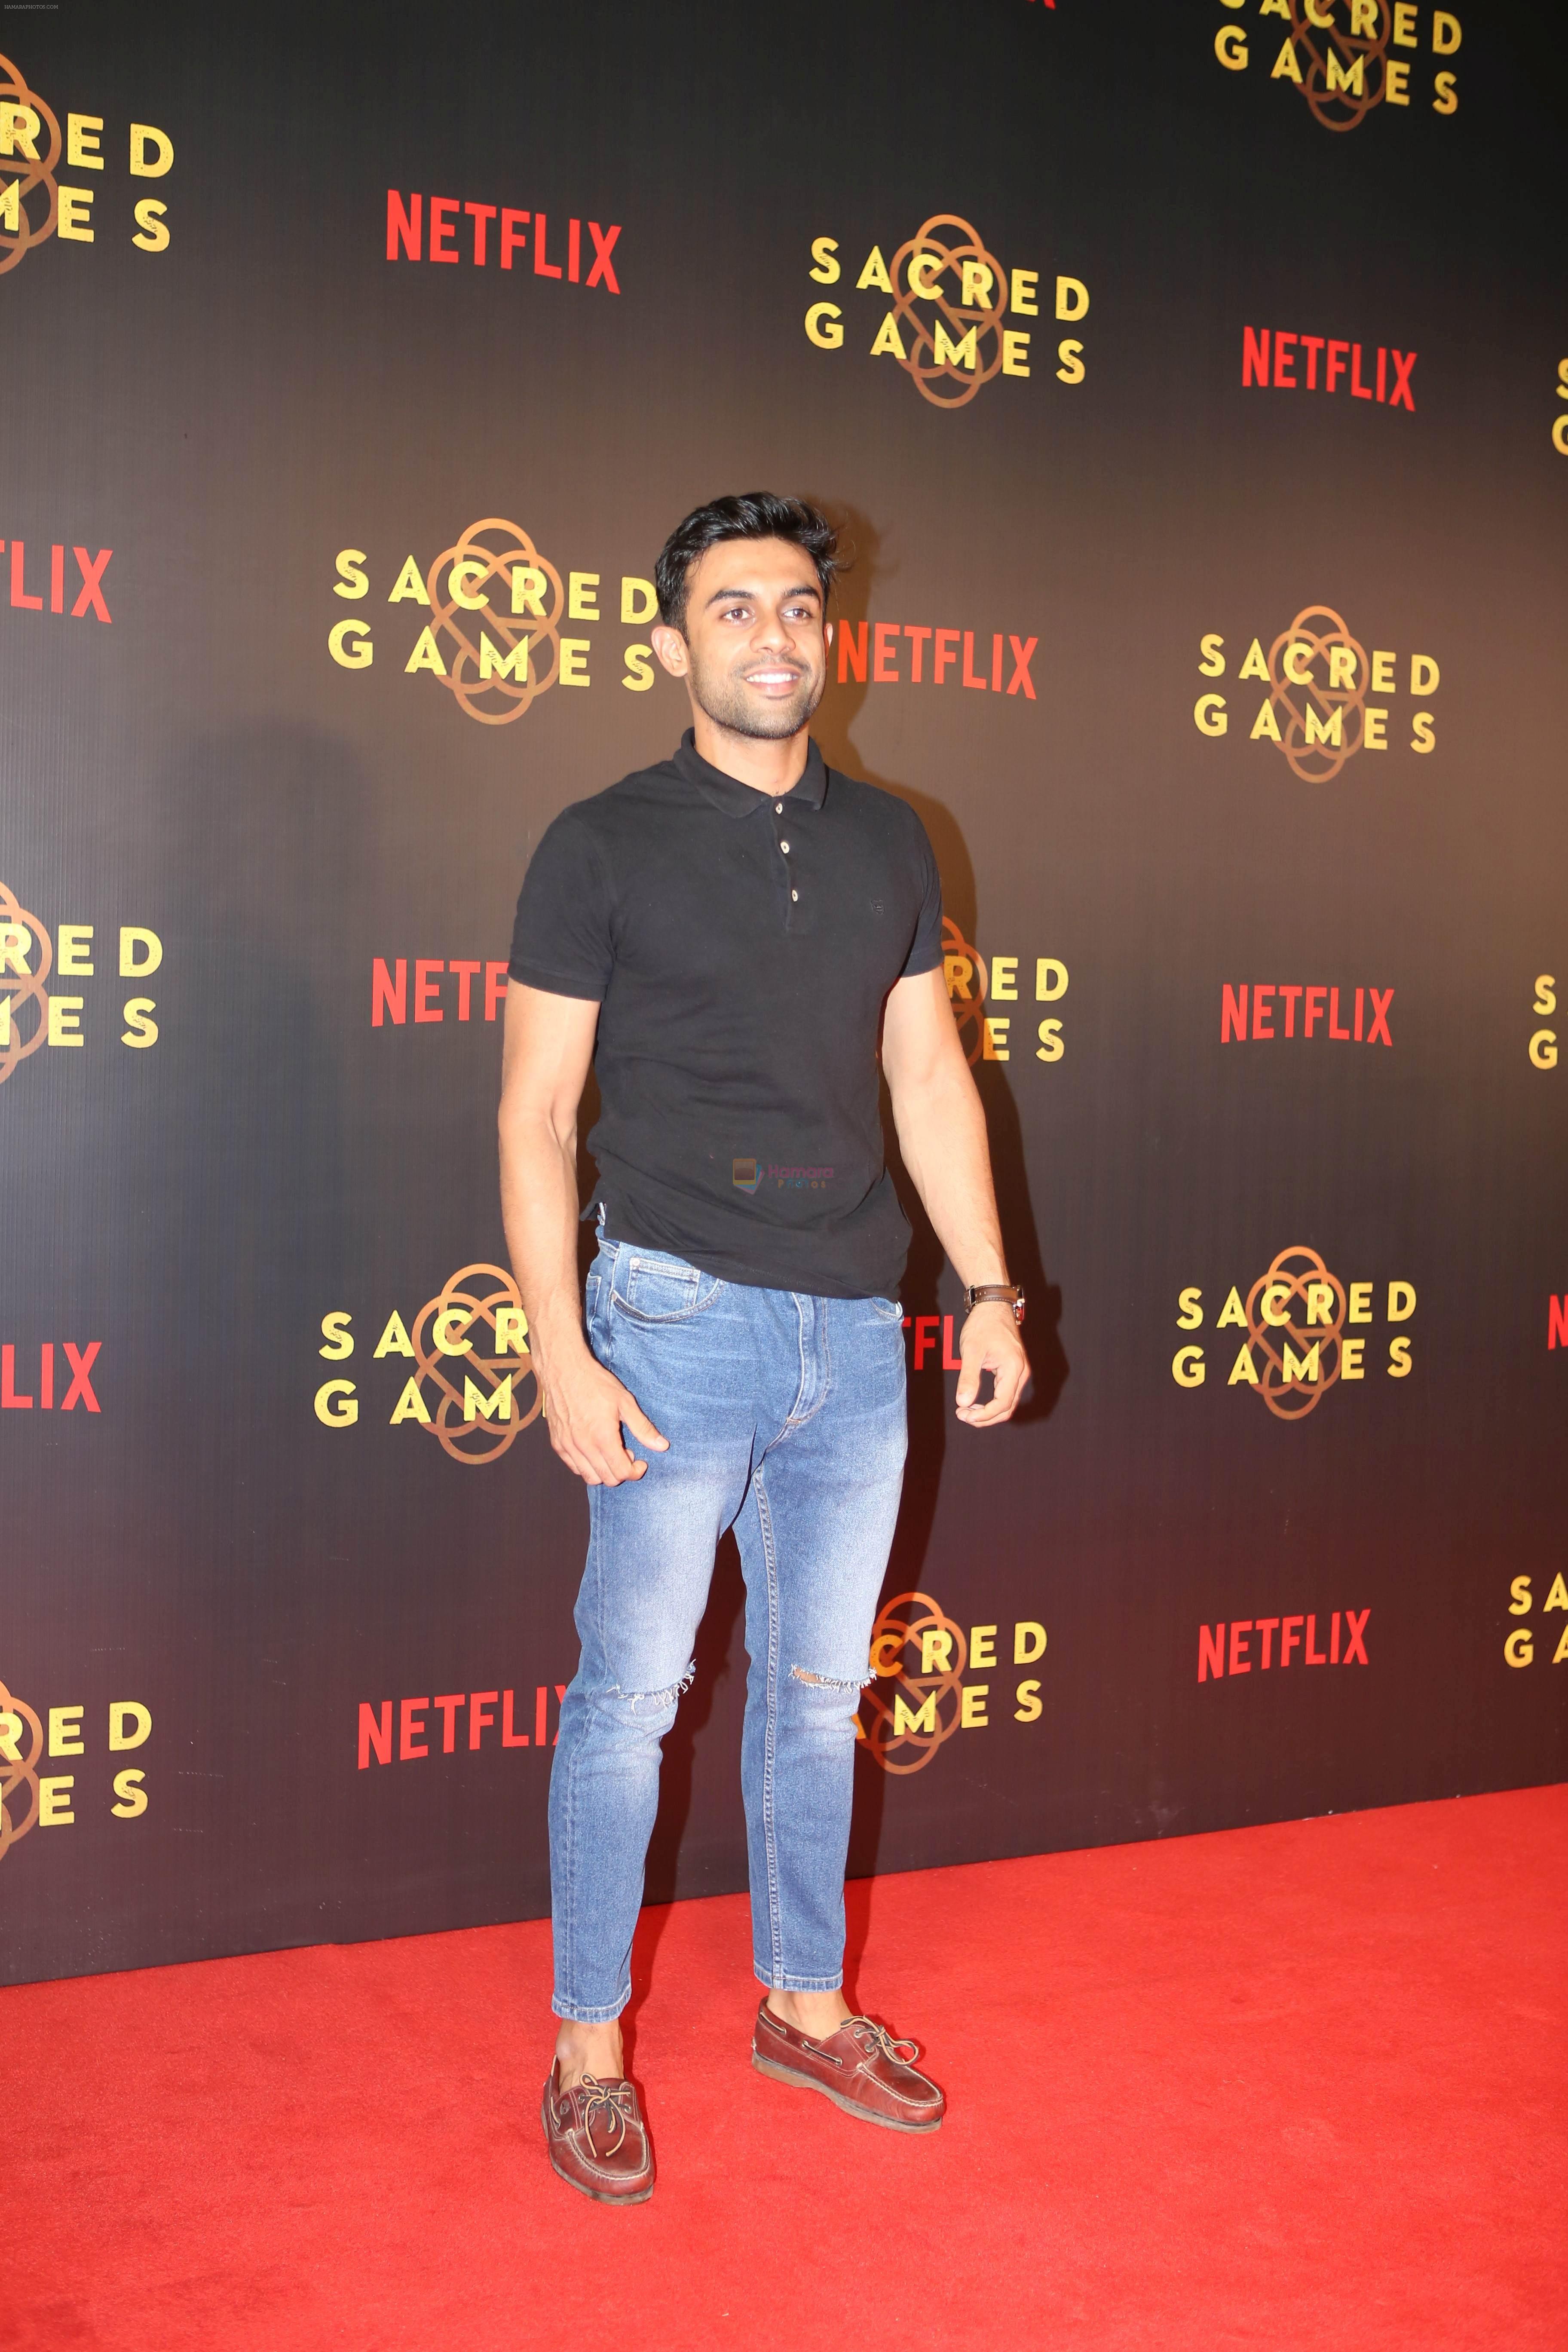 at the Screening of Netflix Sacred Games in pvr icon Andheri on 28th June 2018